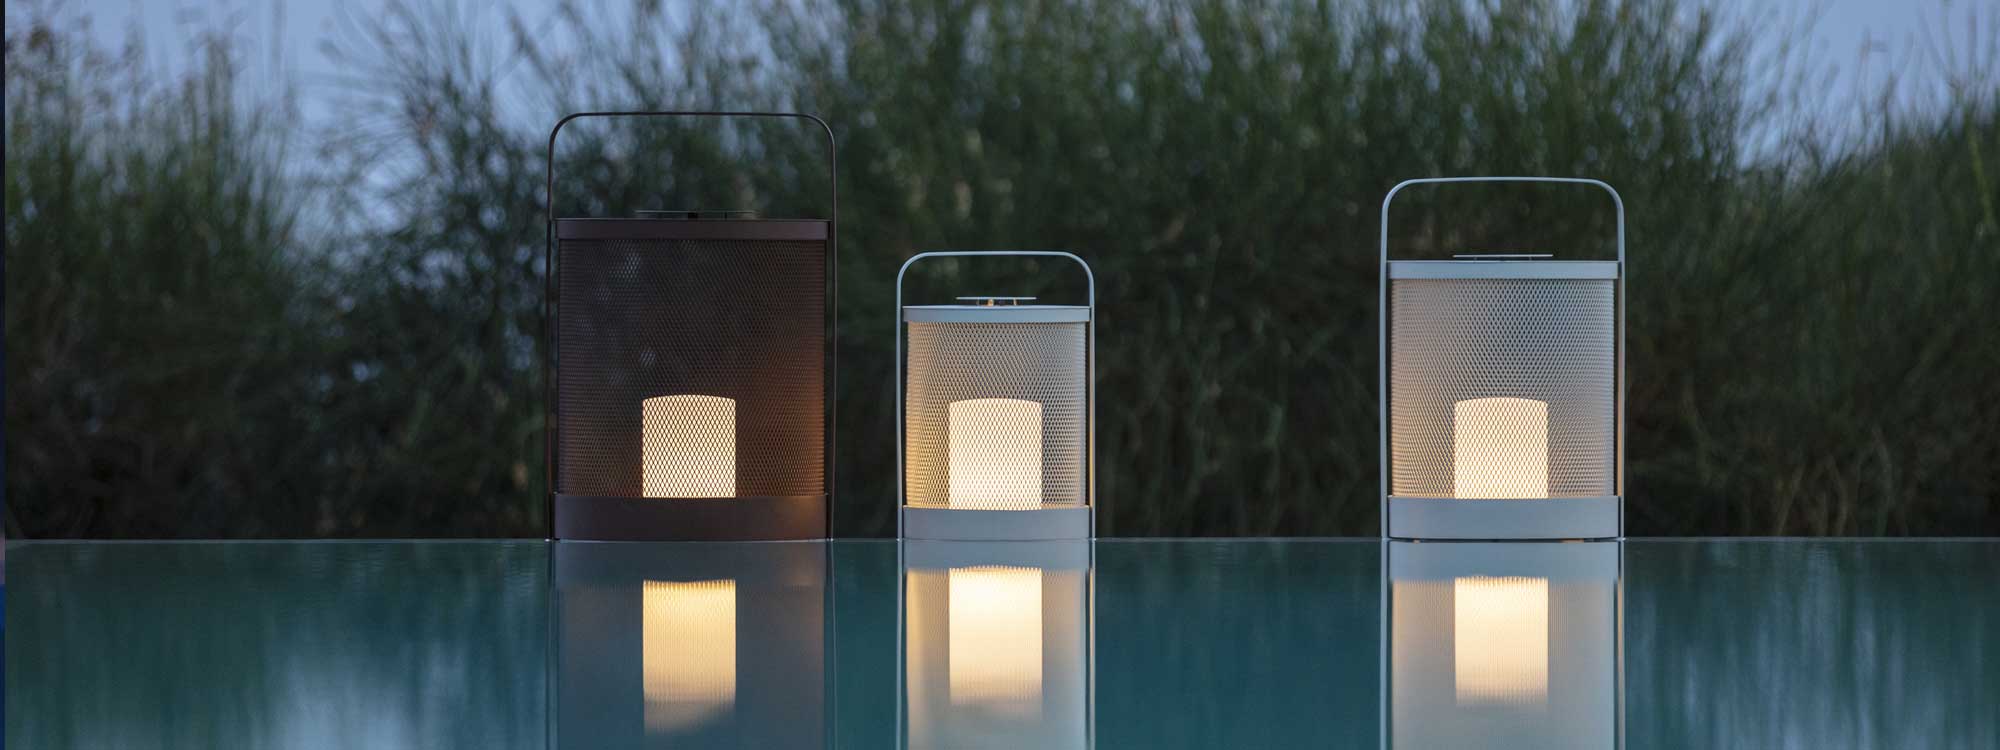 Image of 3 sizes of Luci modern garden lanterns reflected in water of swimming pool